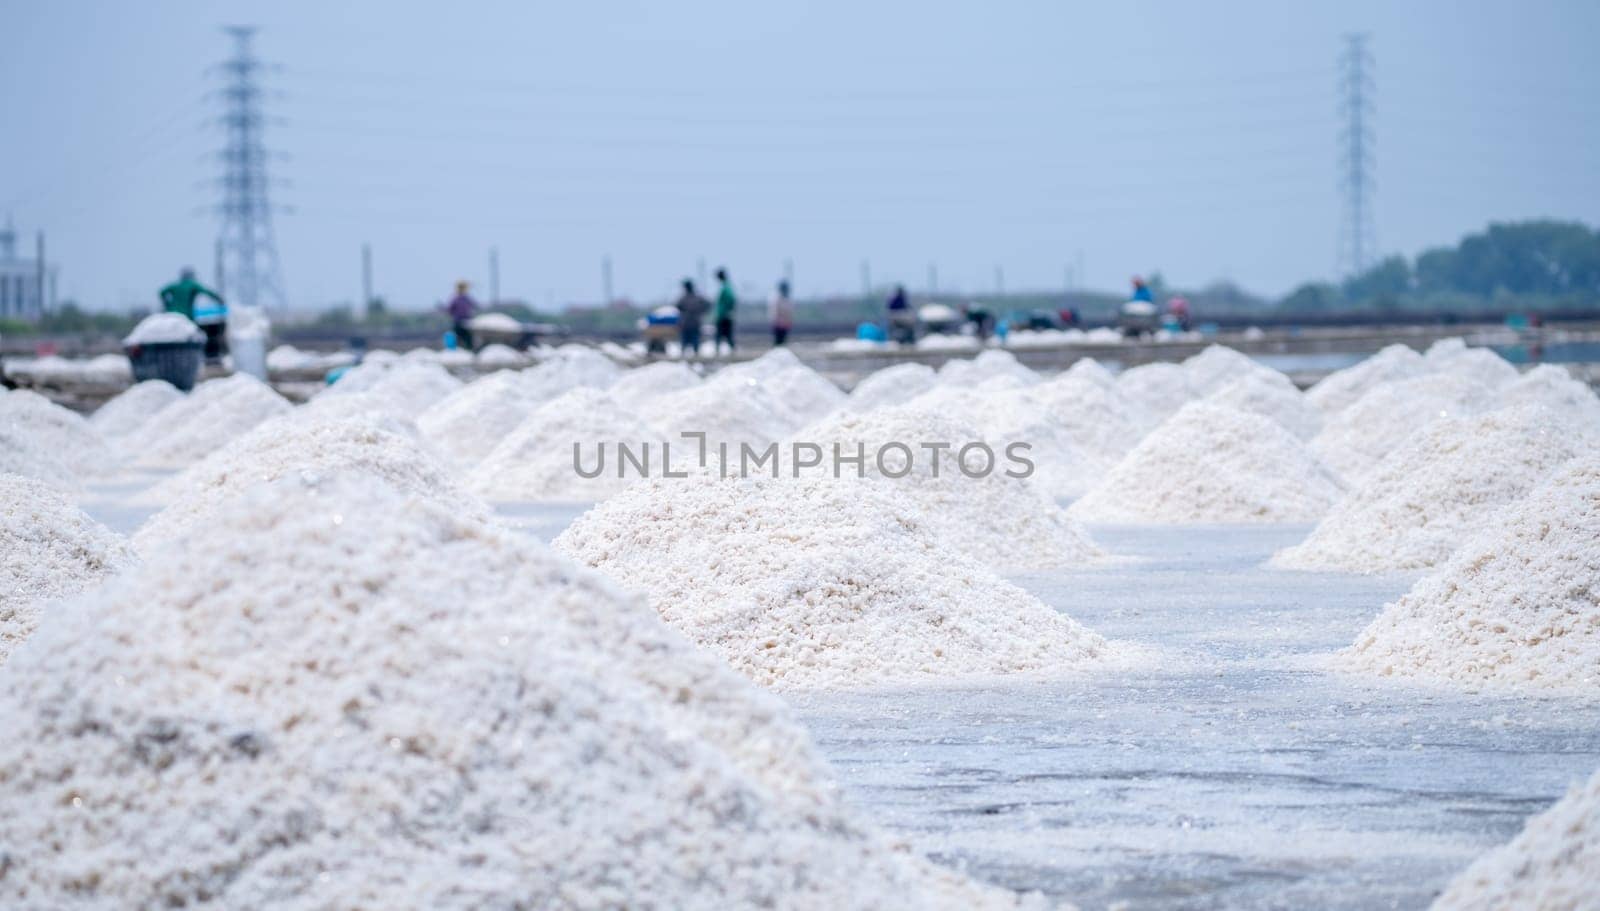 Sea salt farm and blur worker working on farm. Brine salt. Raw material of salt industrial. Sodium Chloride. Evaporation and crystallization of sea water. White salt harvesting. Agriculture industry. by Fahroni